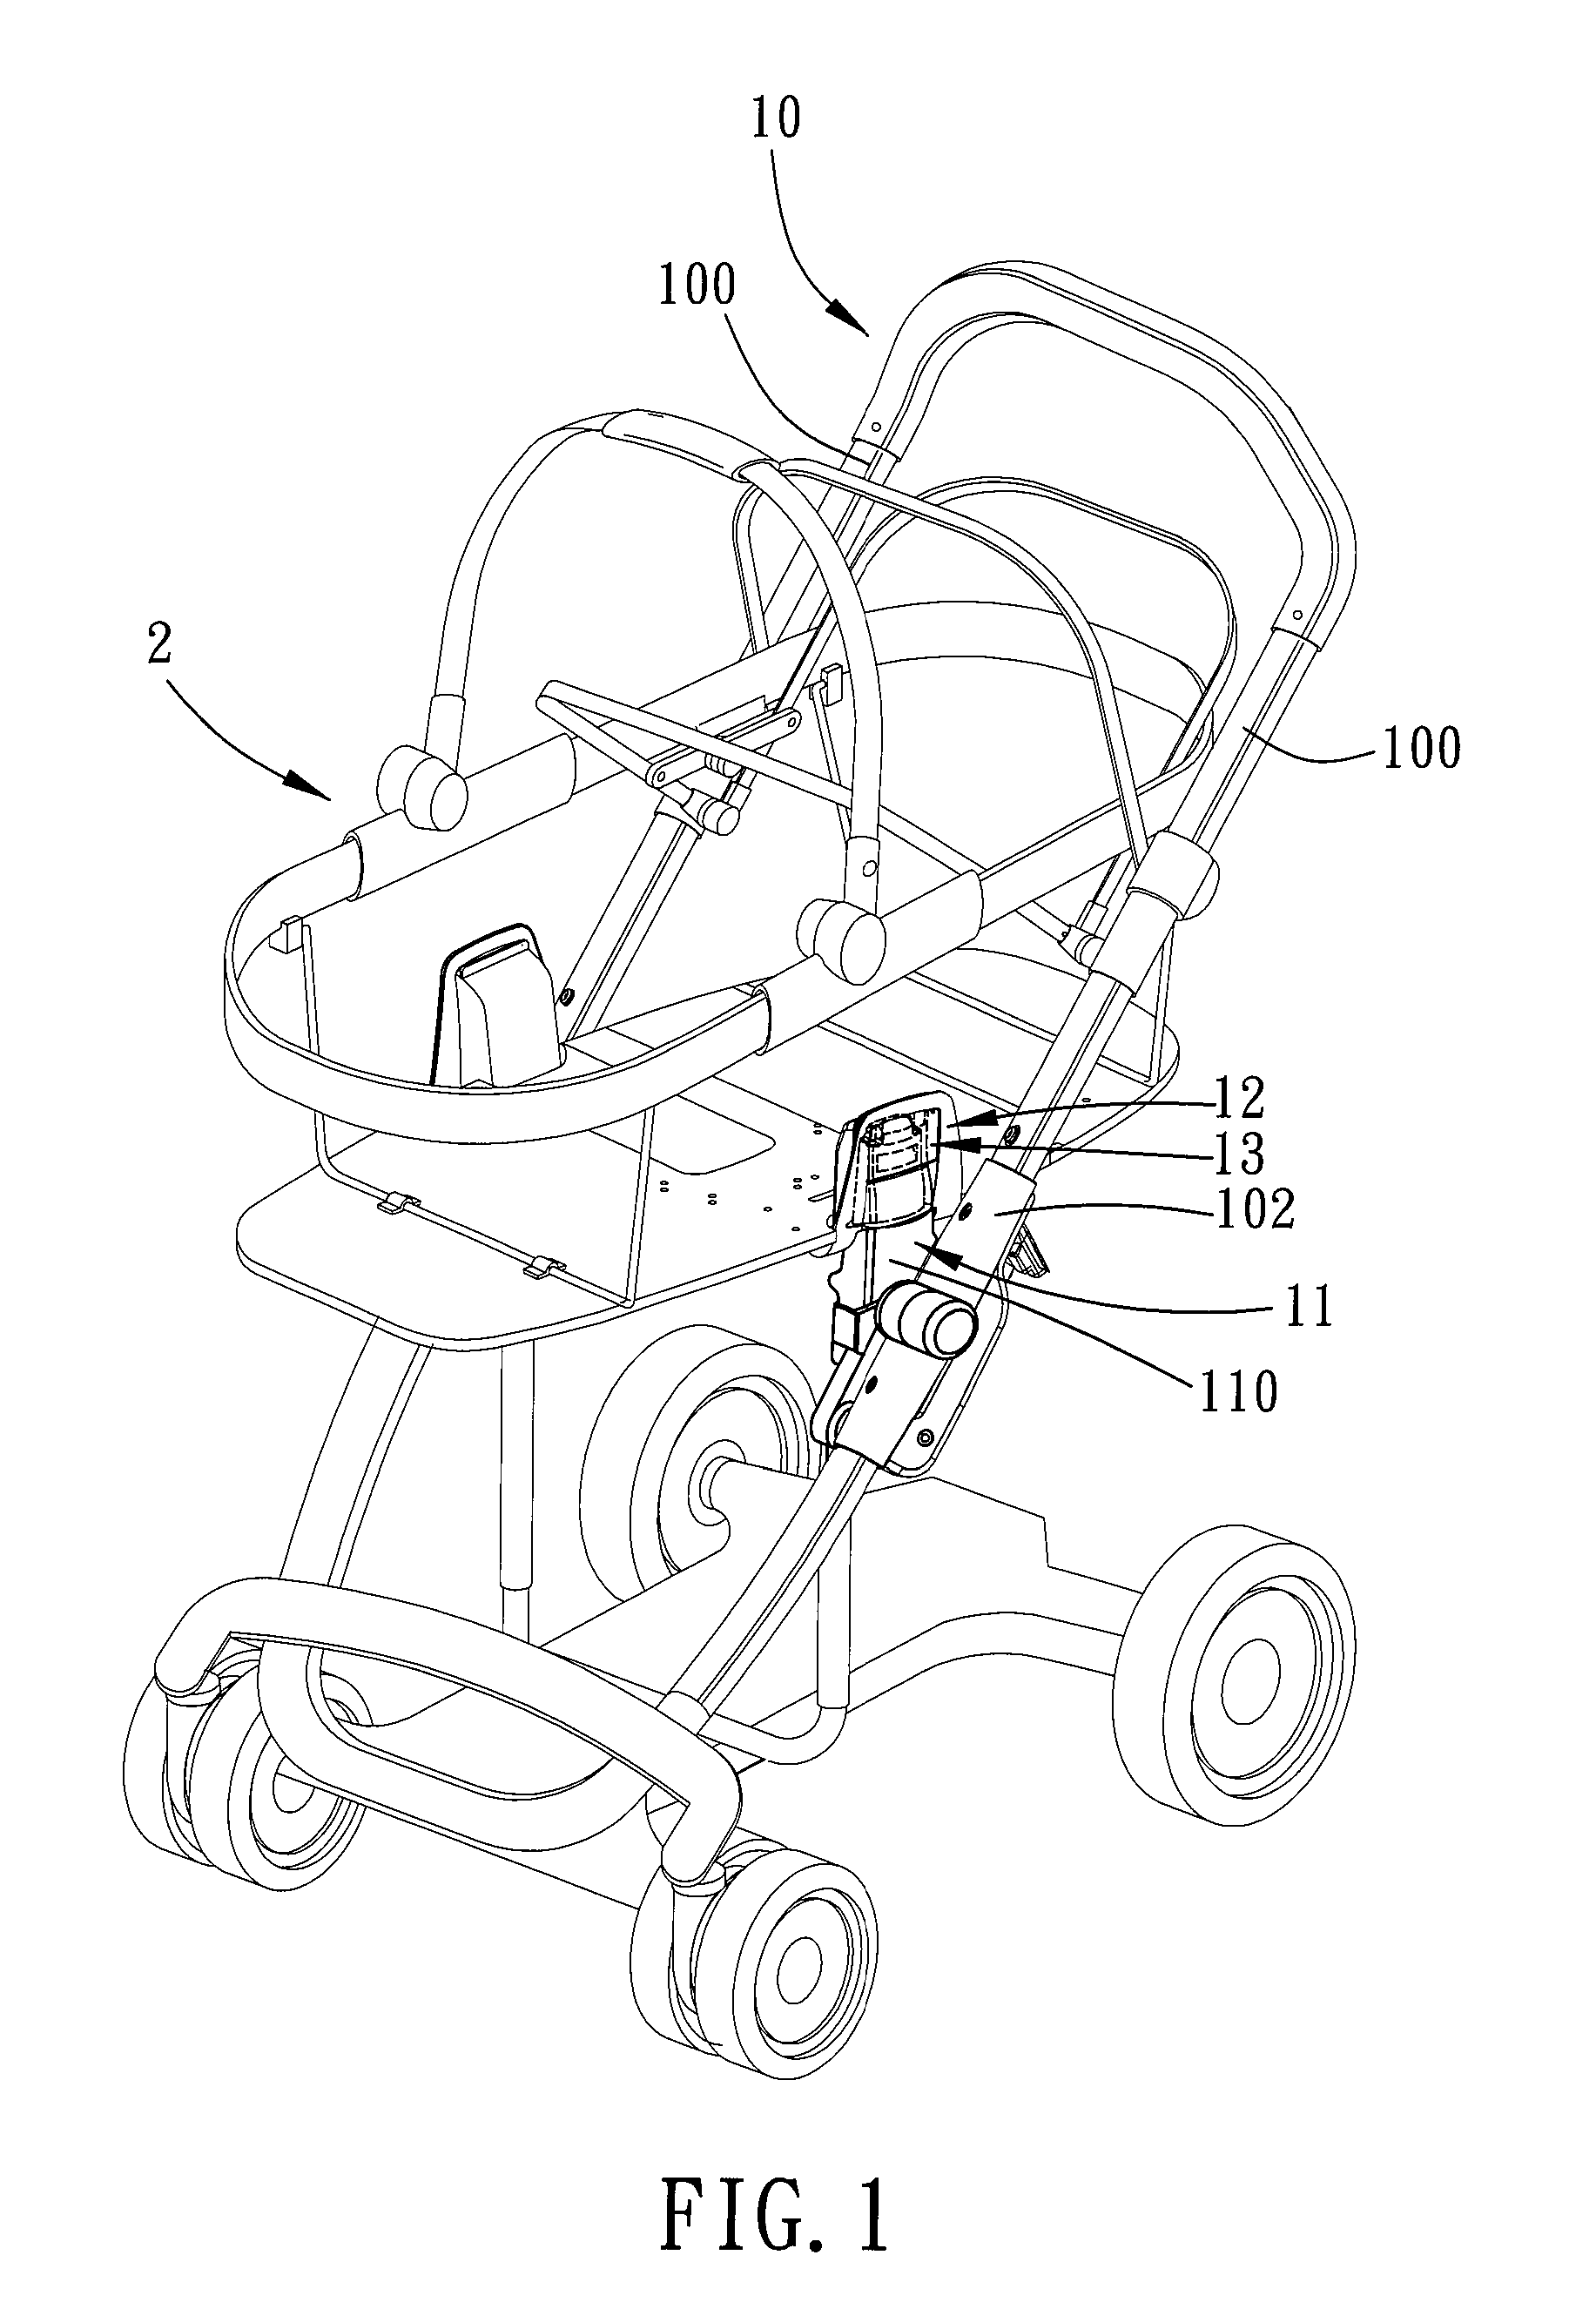 Latch device for coupling a carrier to a stroller frame